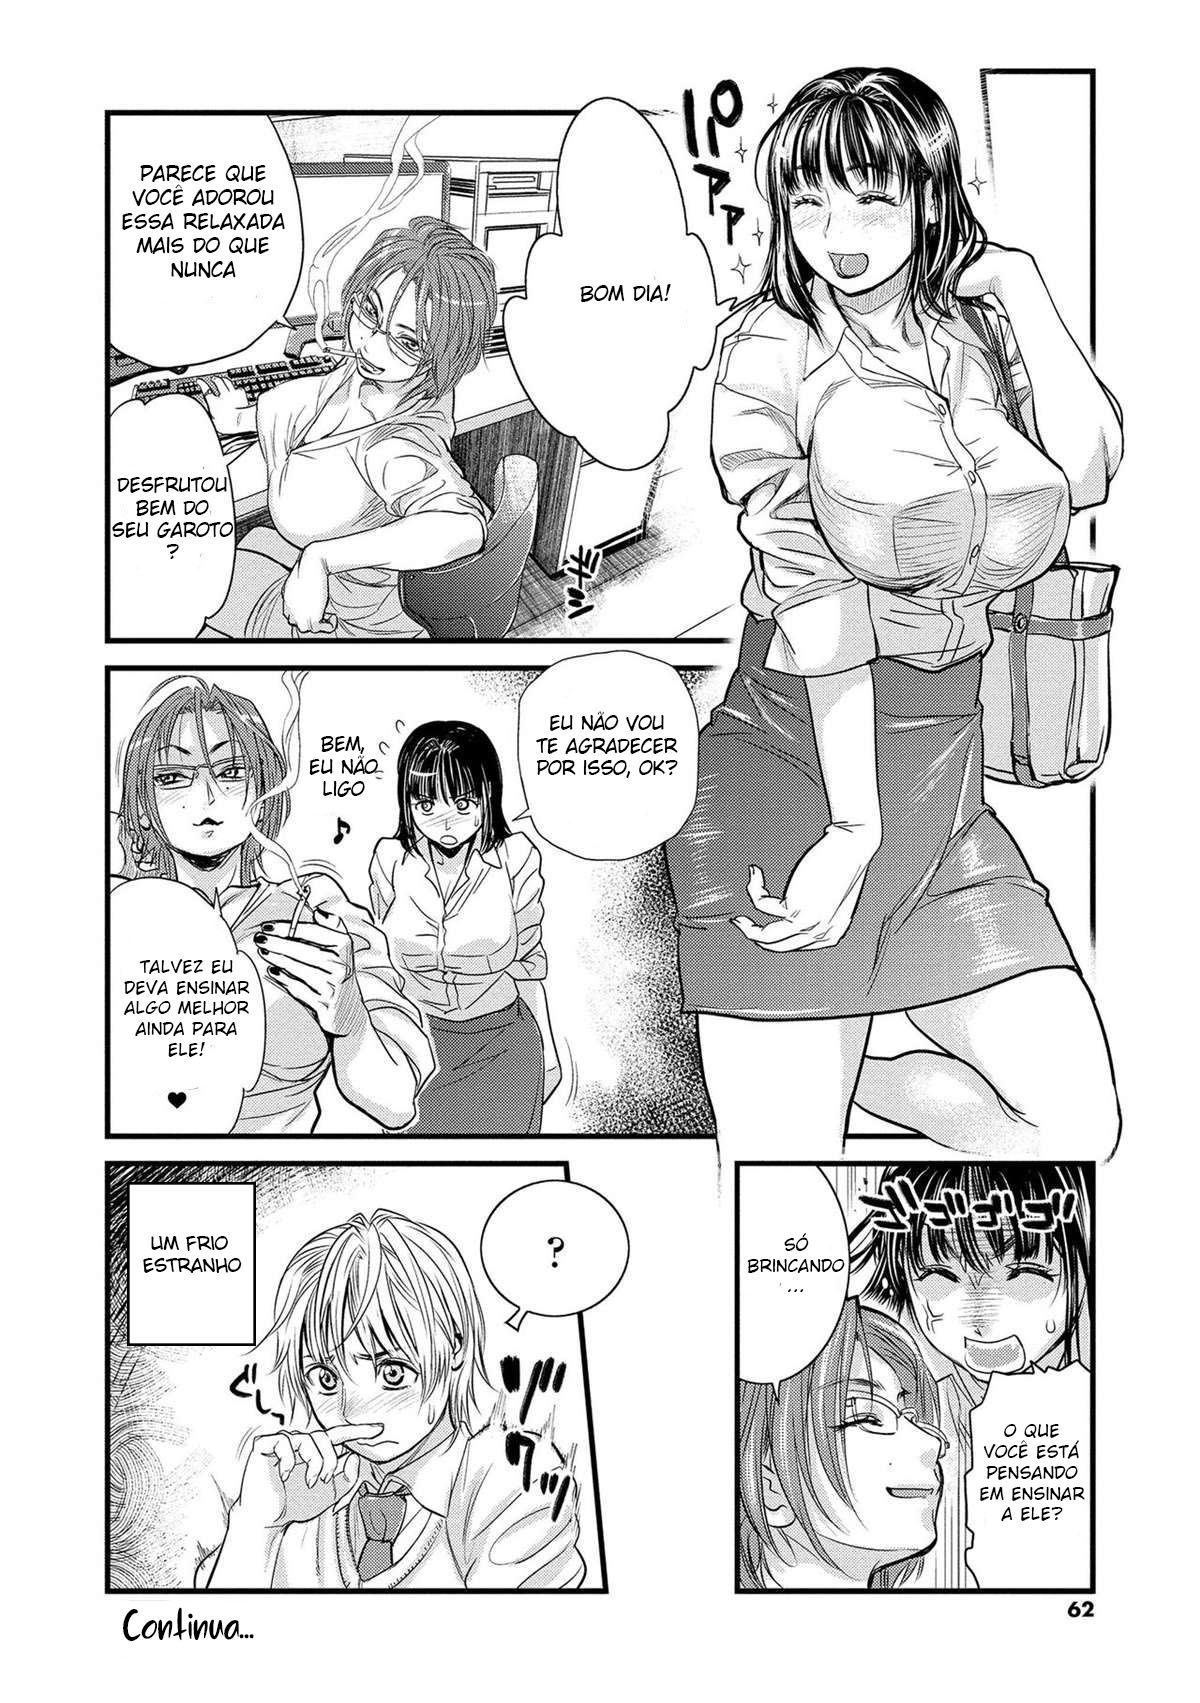 Together With My Older Cousin part 3 Hentai pt-br 19